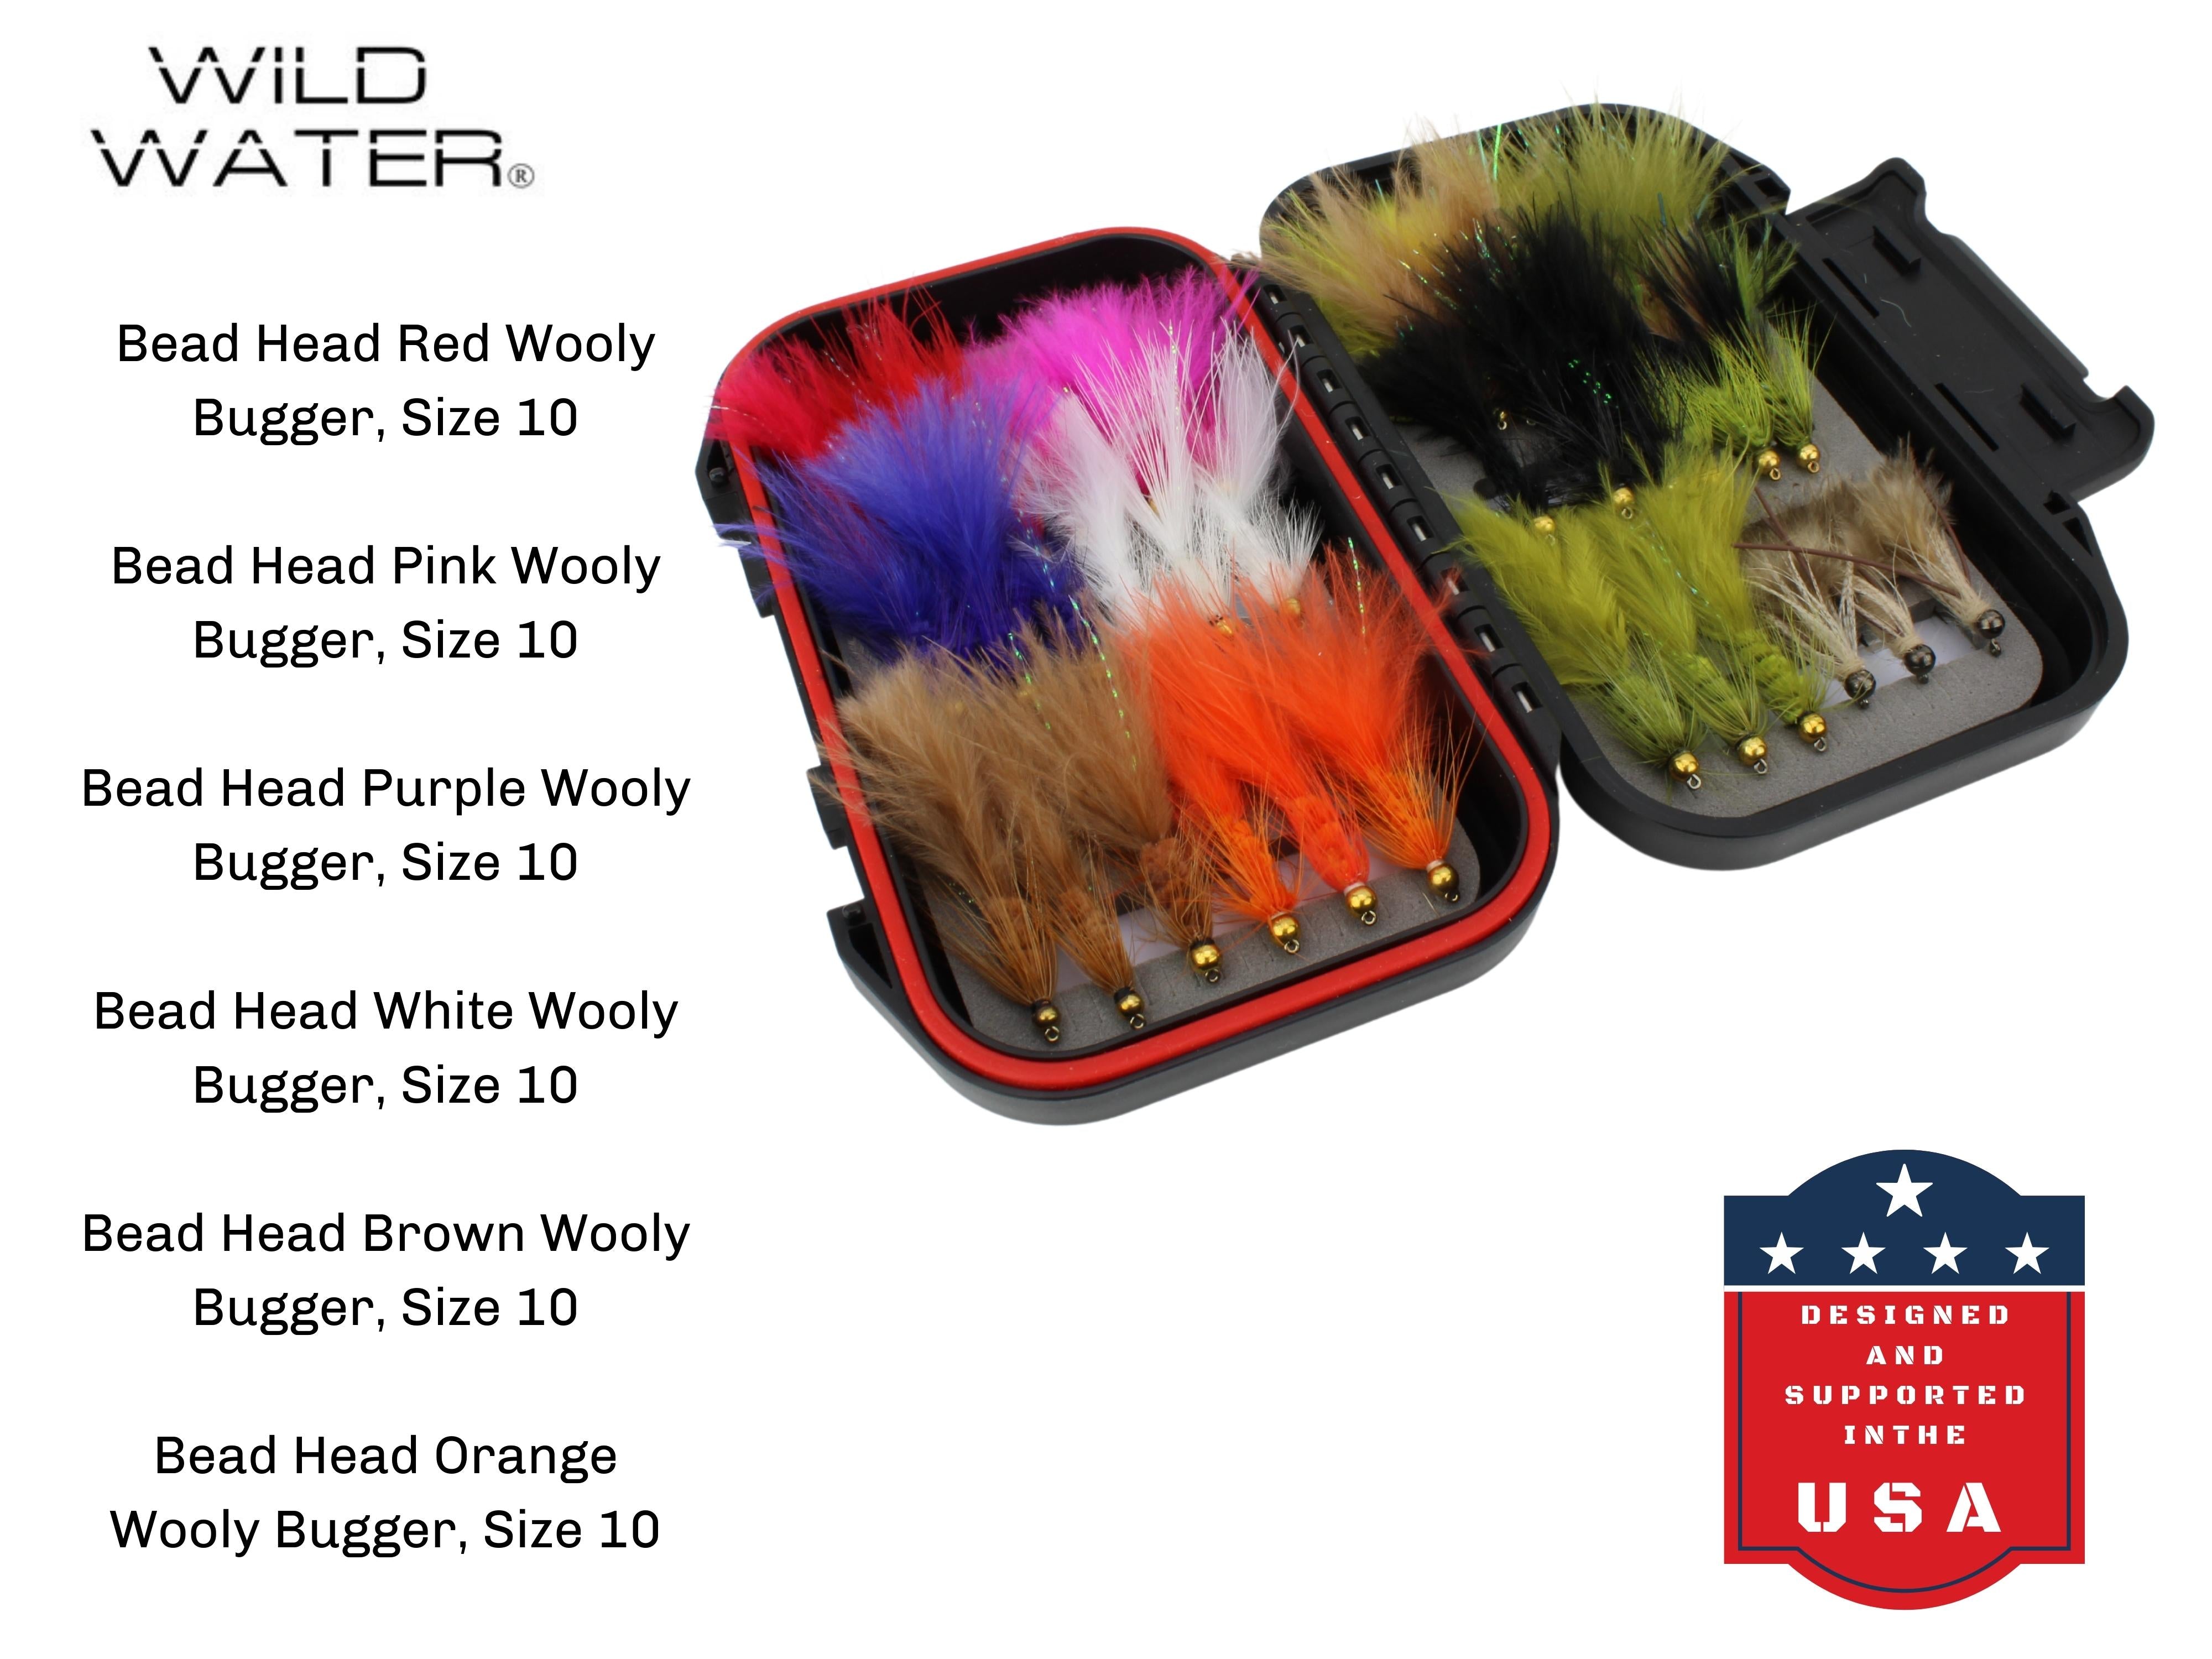 Wild Water Wooly Bugger Fly Assortment, 36 Flies with Small Fly Box